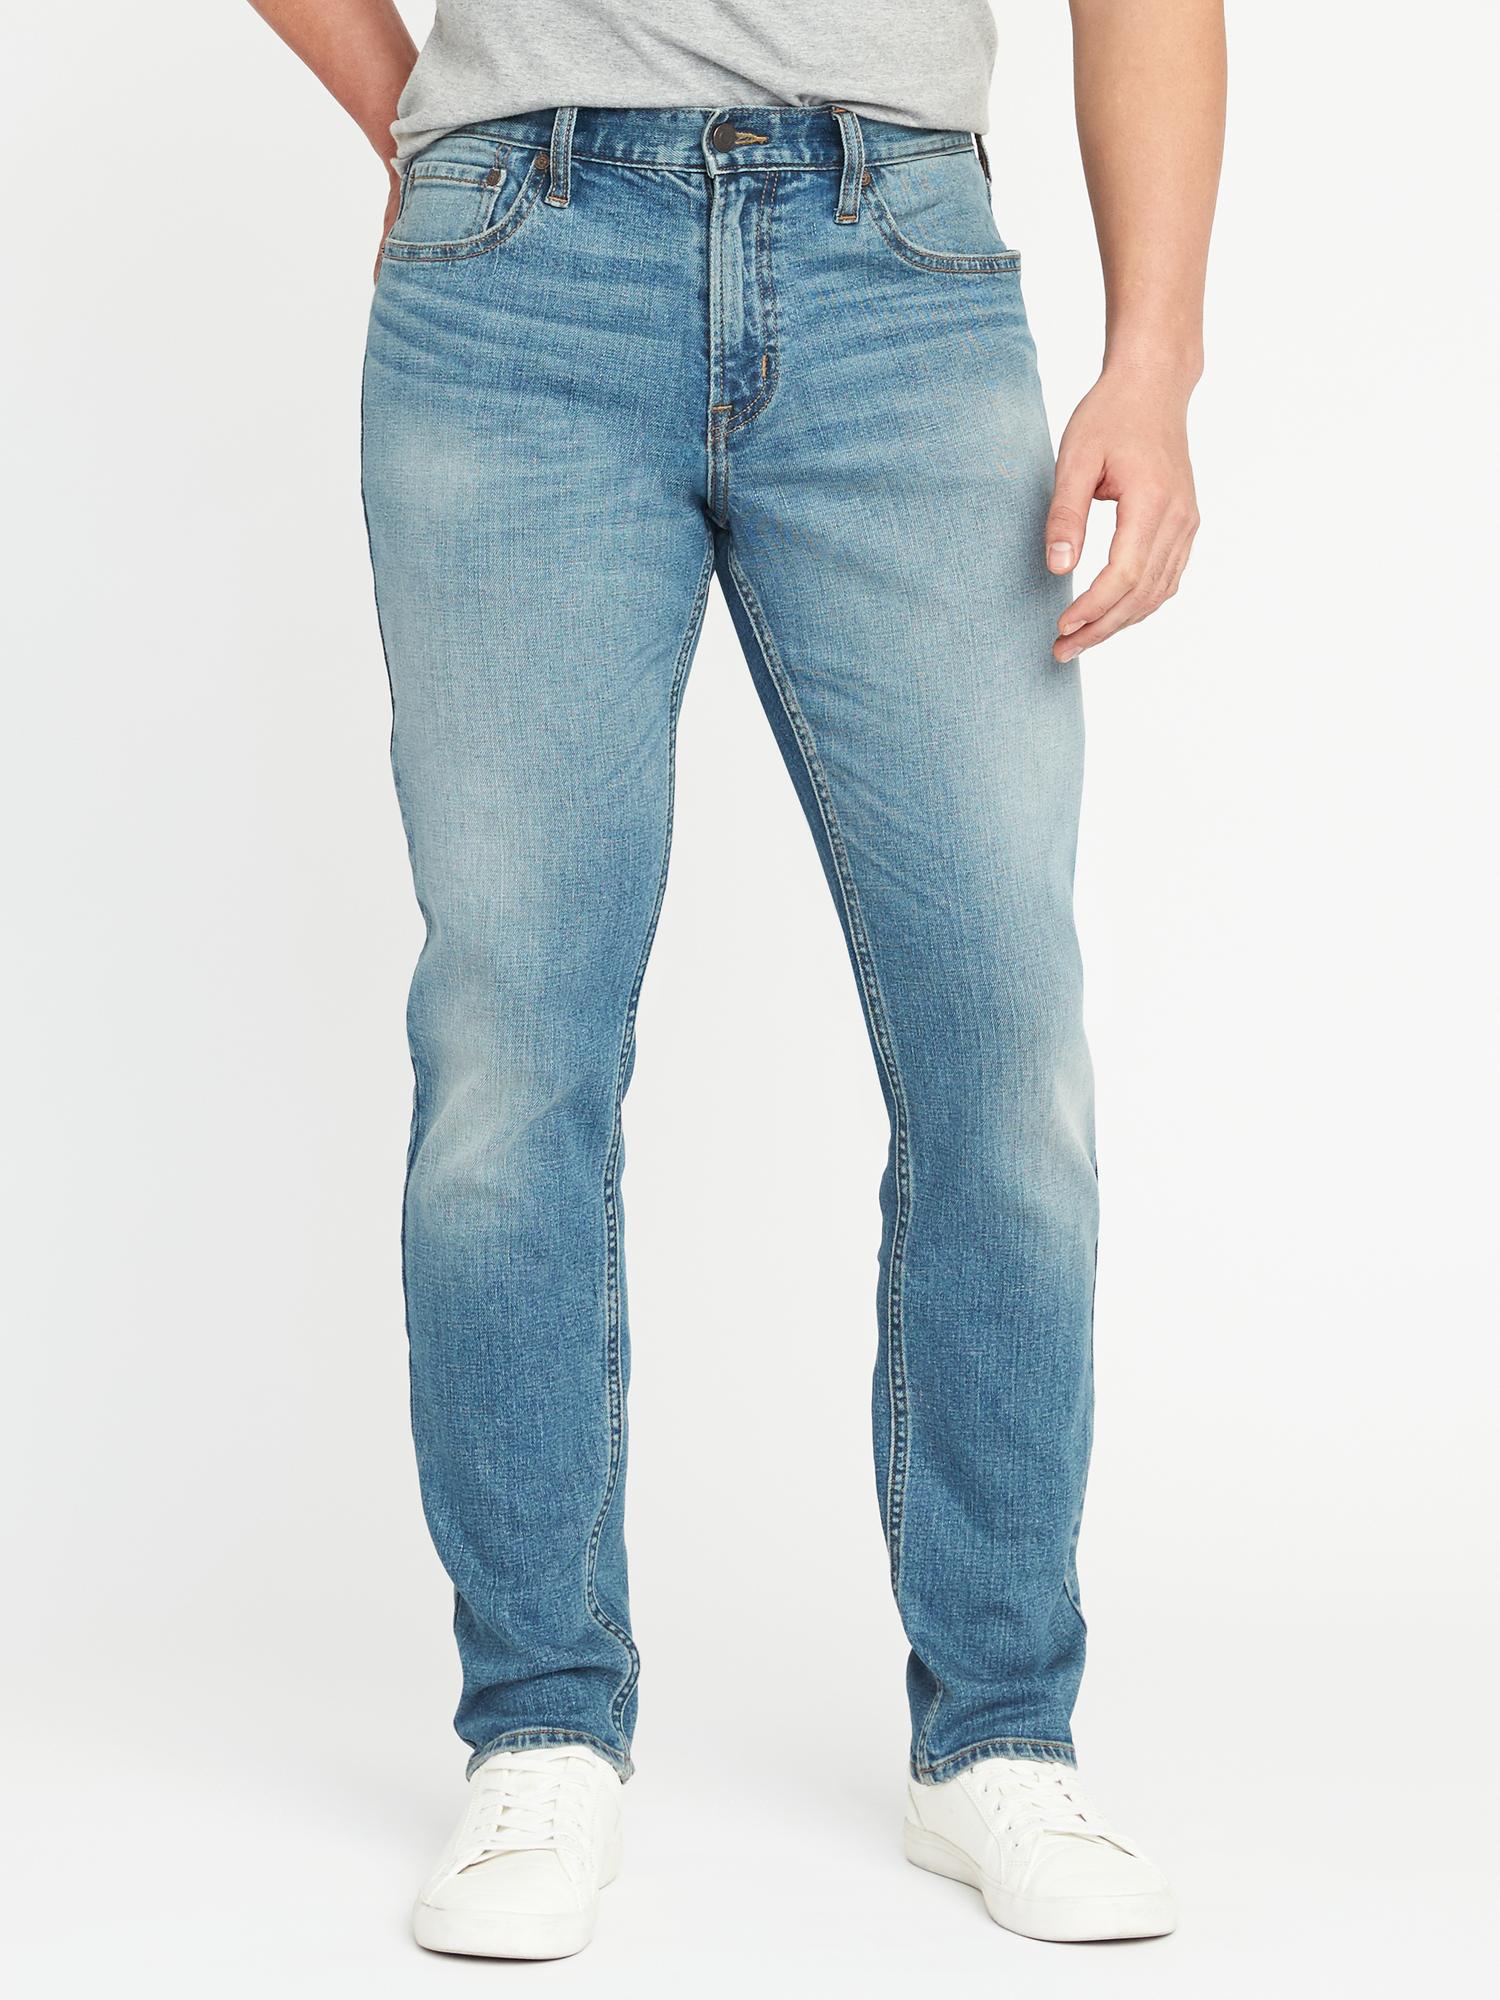 mens athletic jeans